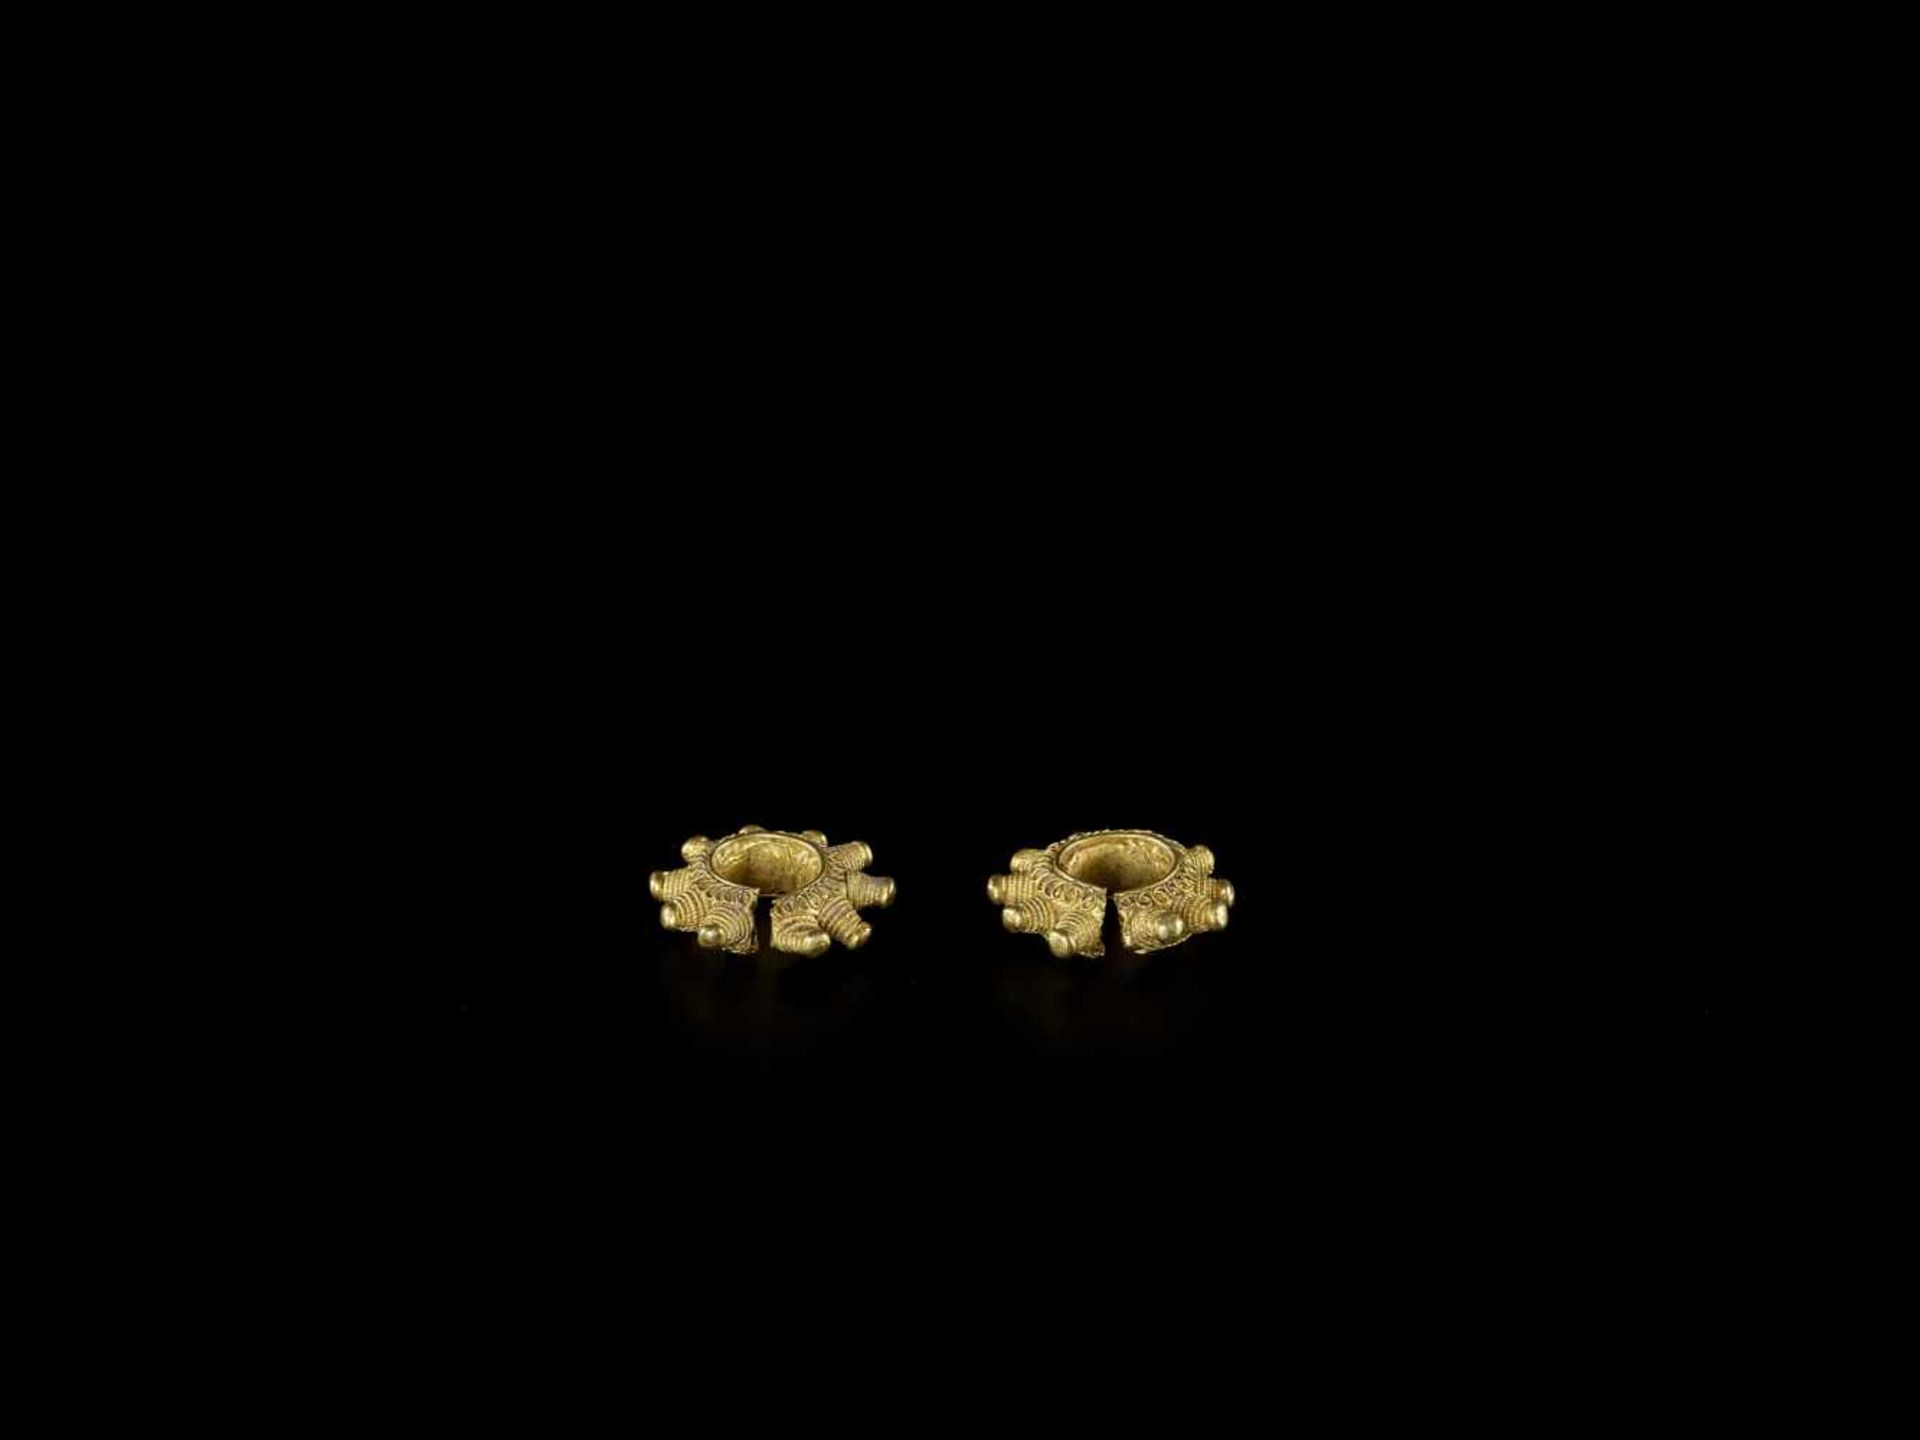 A PAIR OF GOLD EAR ORNAMENTS WITH ELABORATE GOLD THREAD DECORATIONS South East Asian Archipelago, - Image 3 of 6